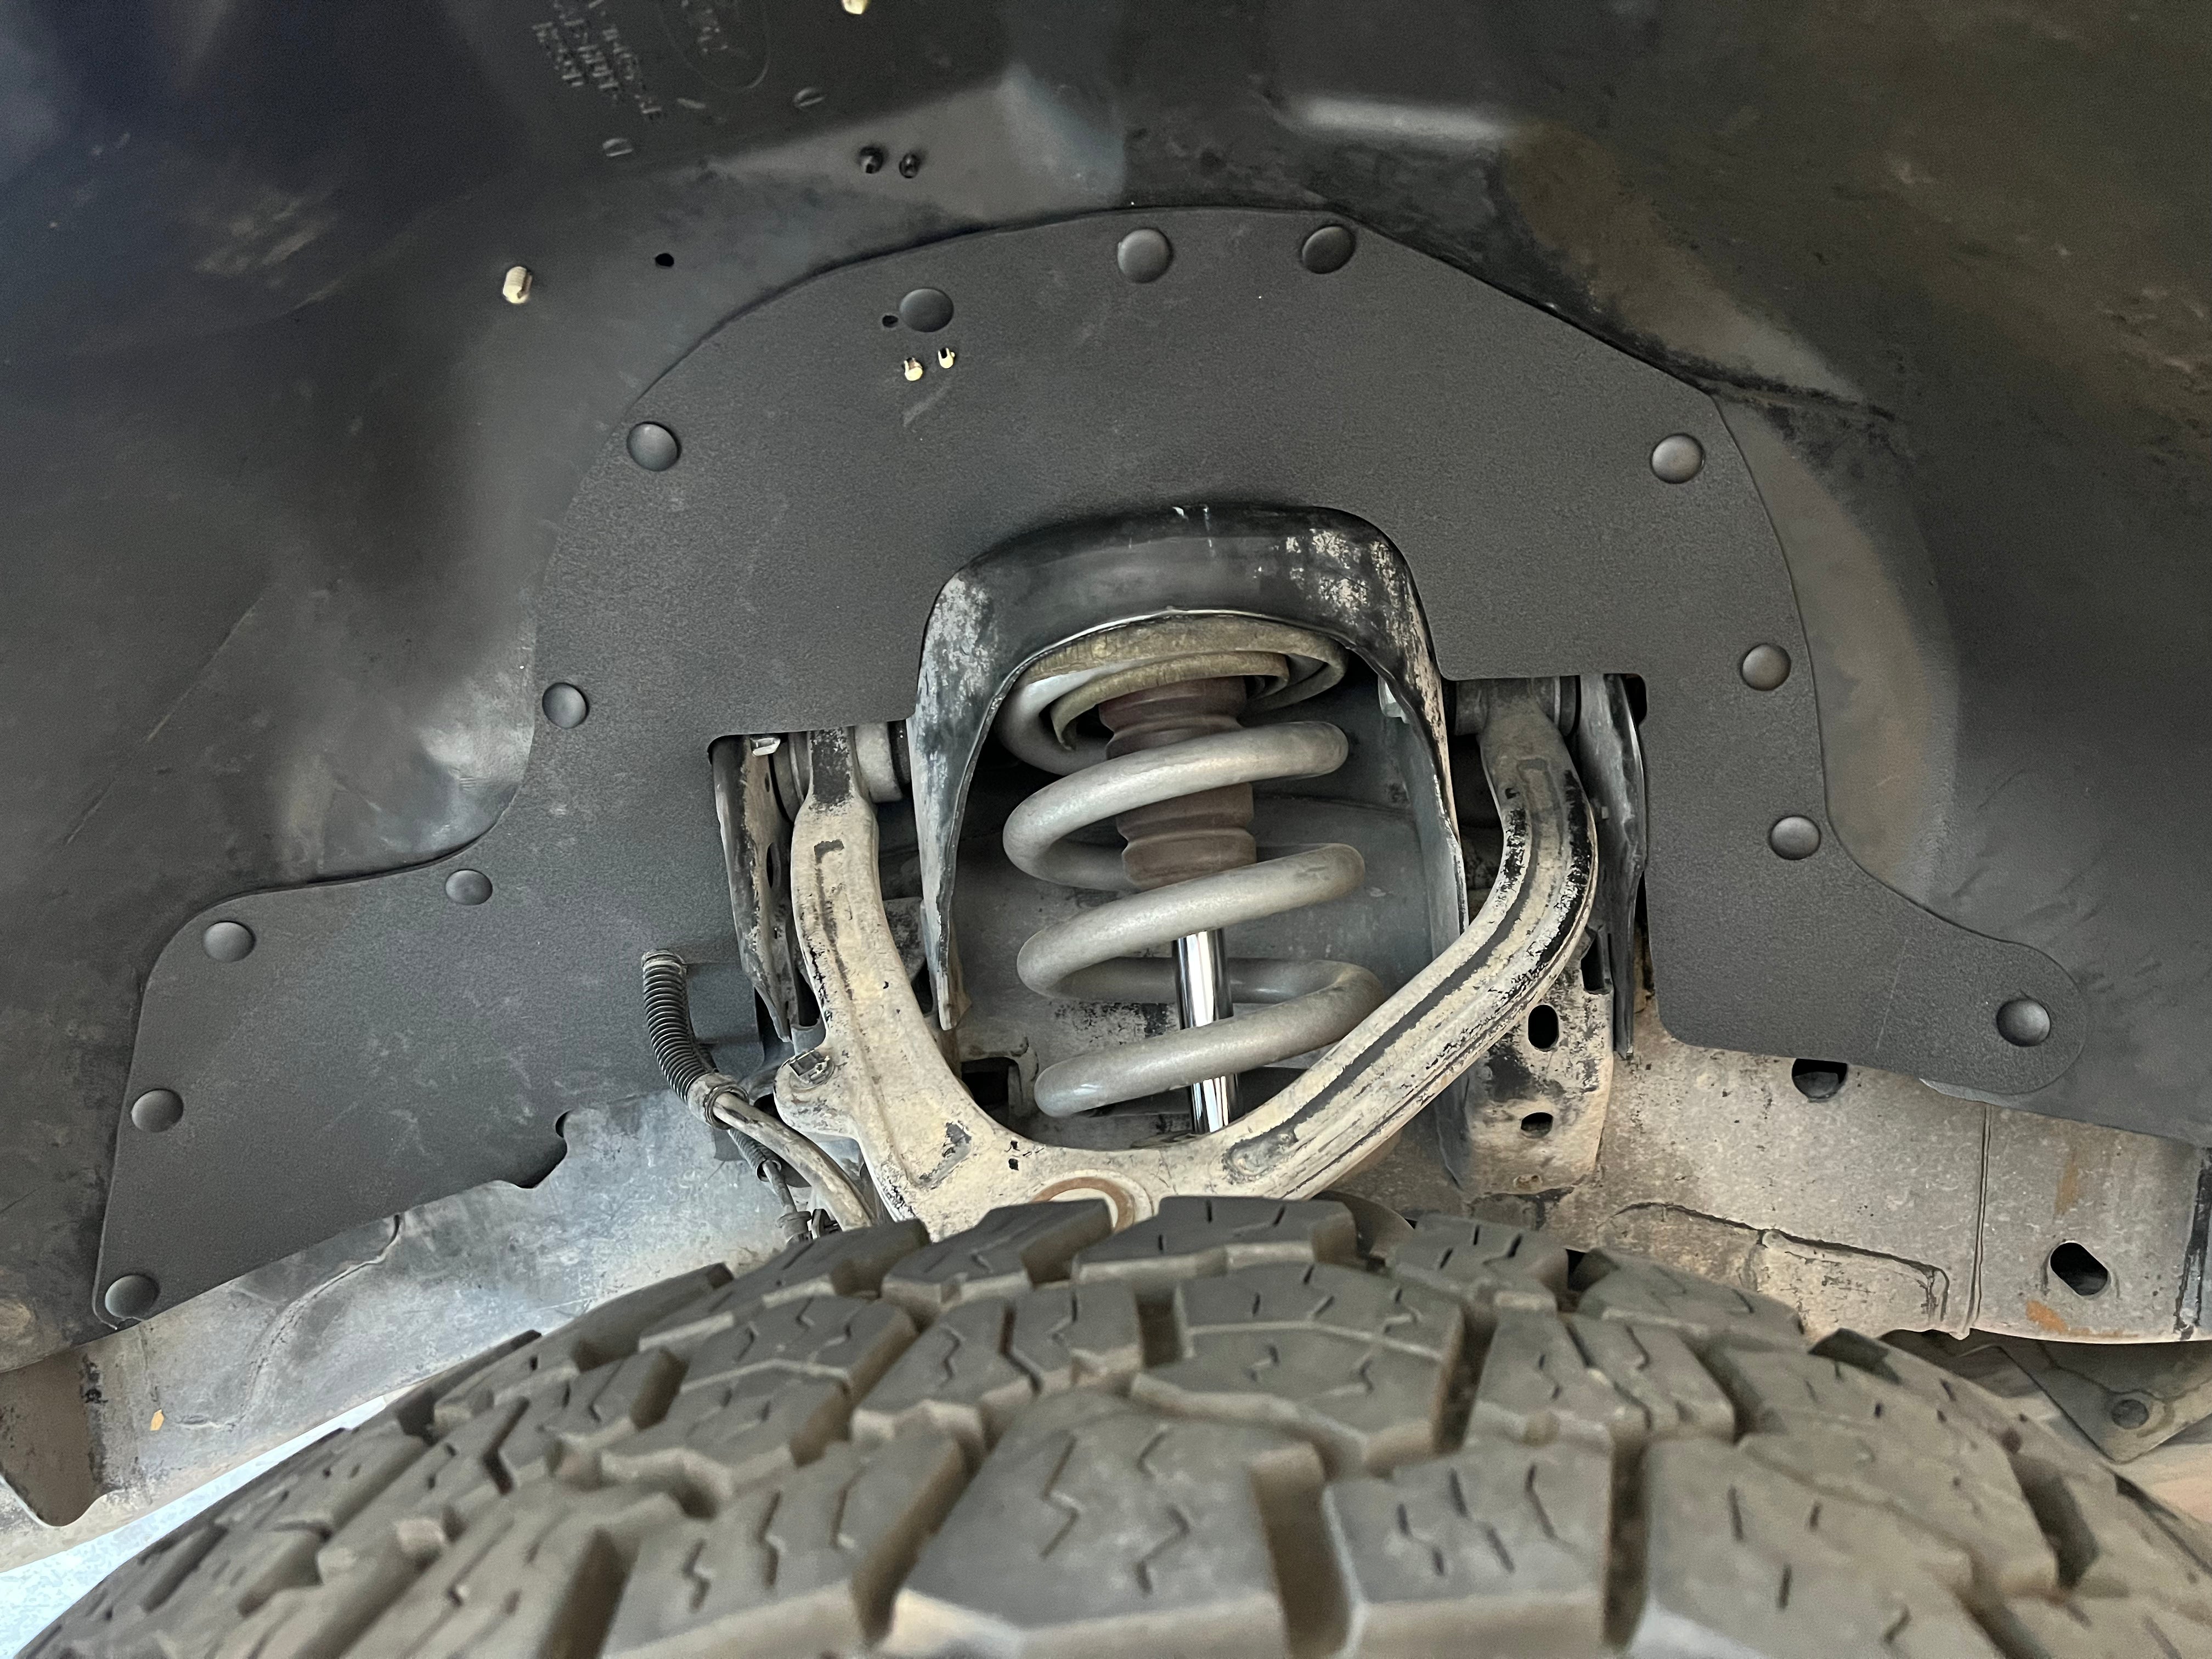 2010-2014 Ford Raptor Driver Side front wheel well with Ark Splash Guards covering up exposed engine bay behind suspension